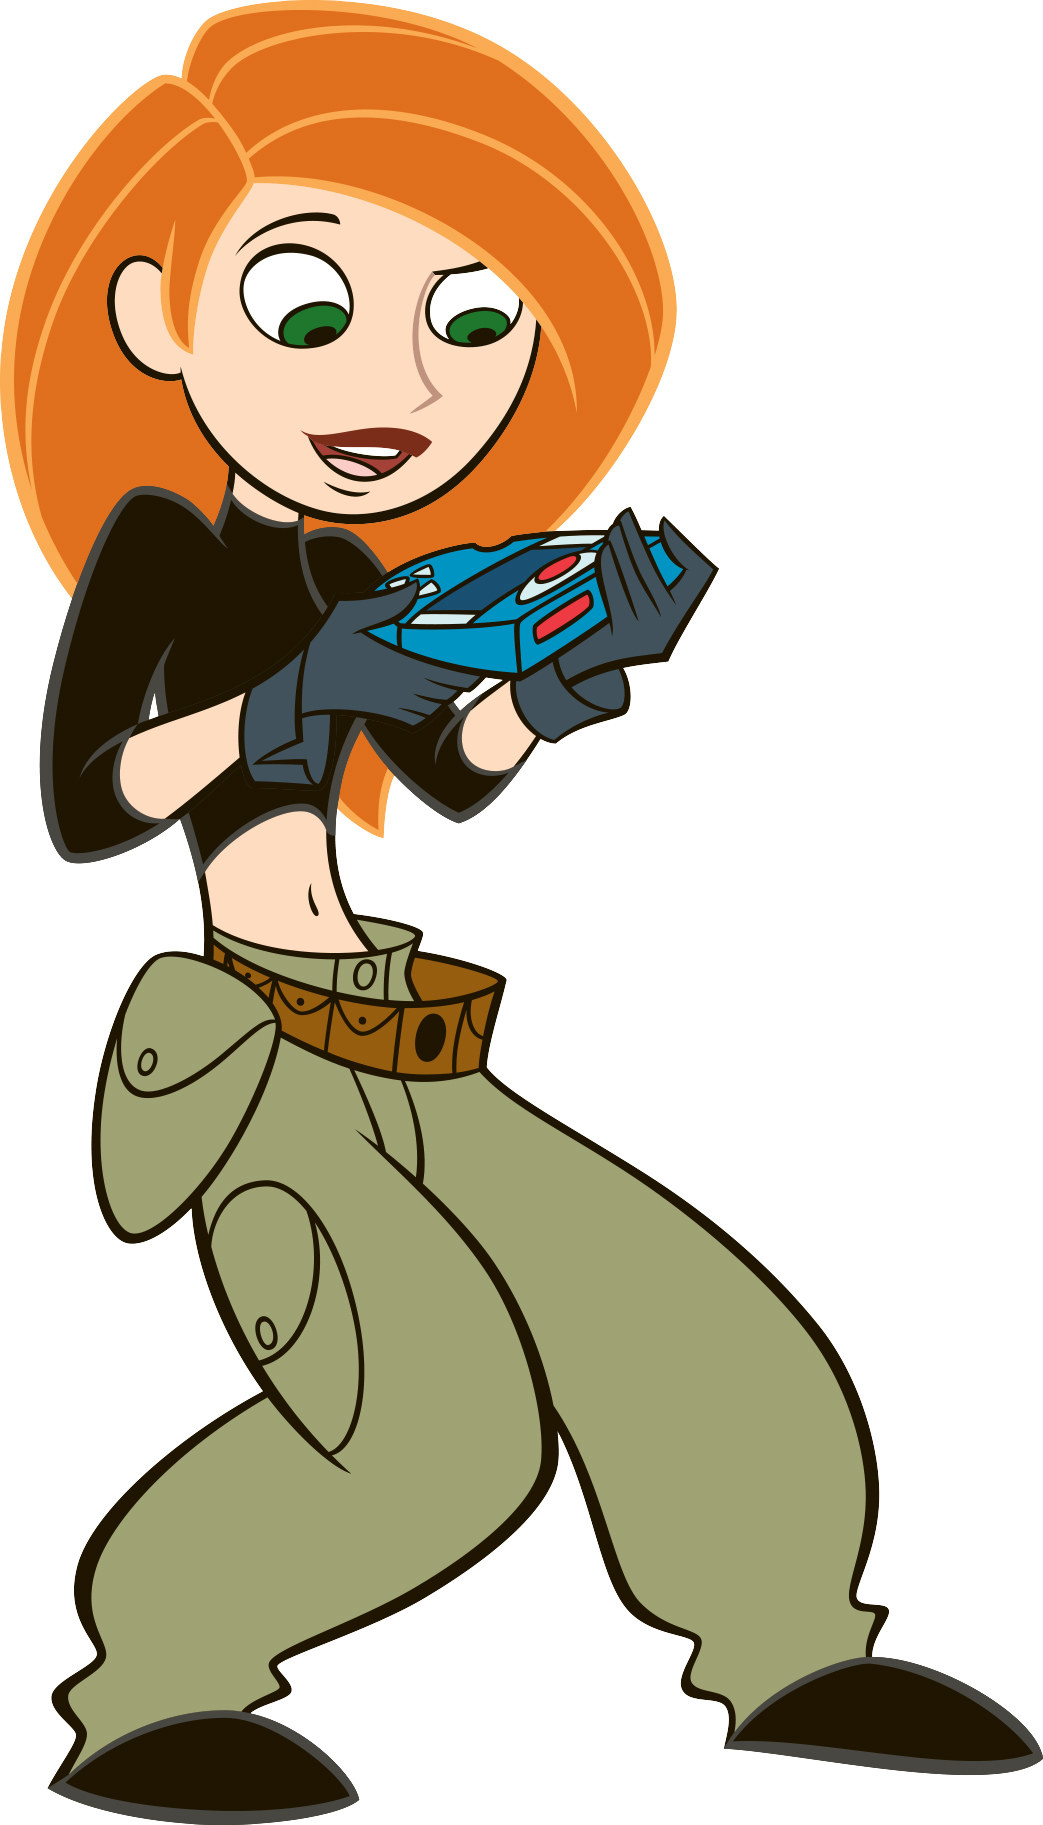 Kim Possible Wallpapers High Quality Download Free.